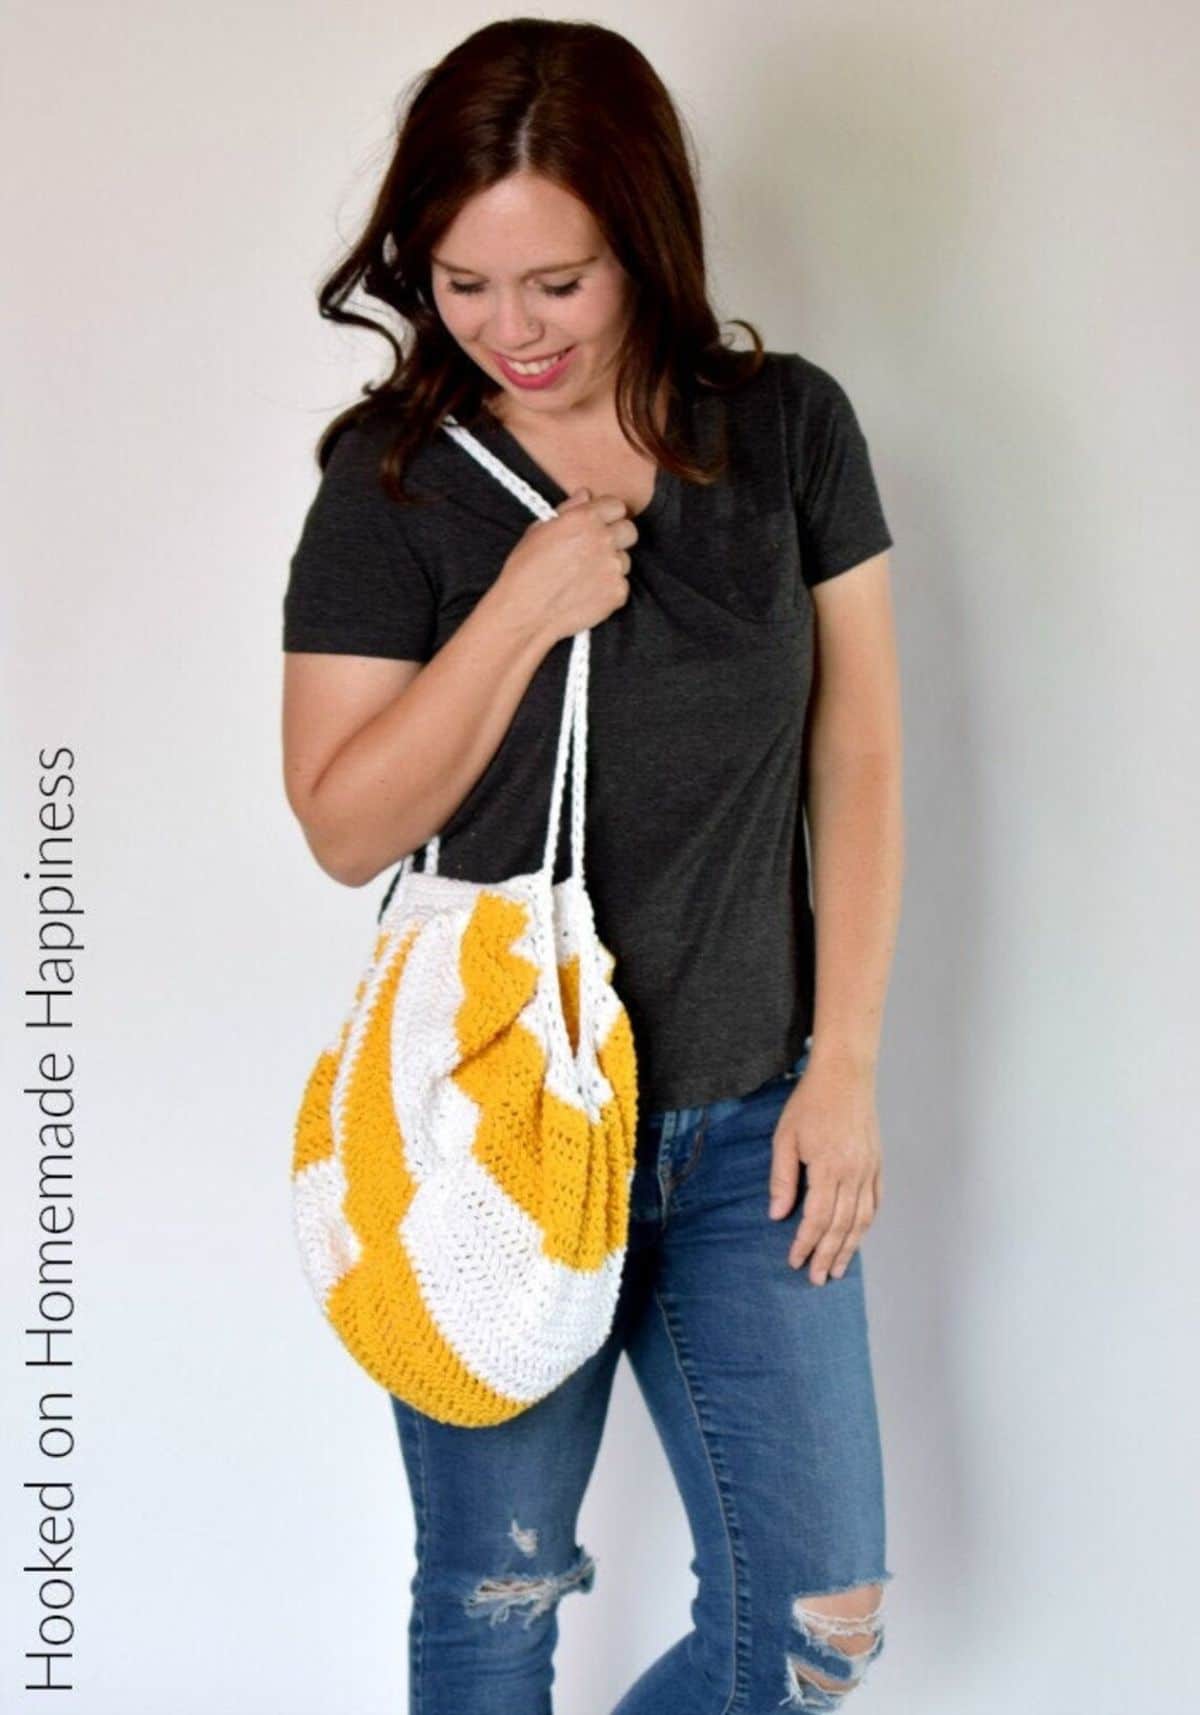 Dark haired woman standing with a white and mustard yellow crochet round bag with long thin straps. 